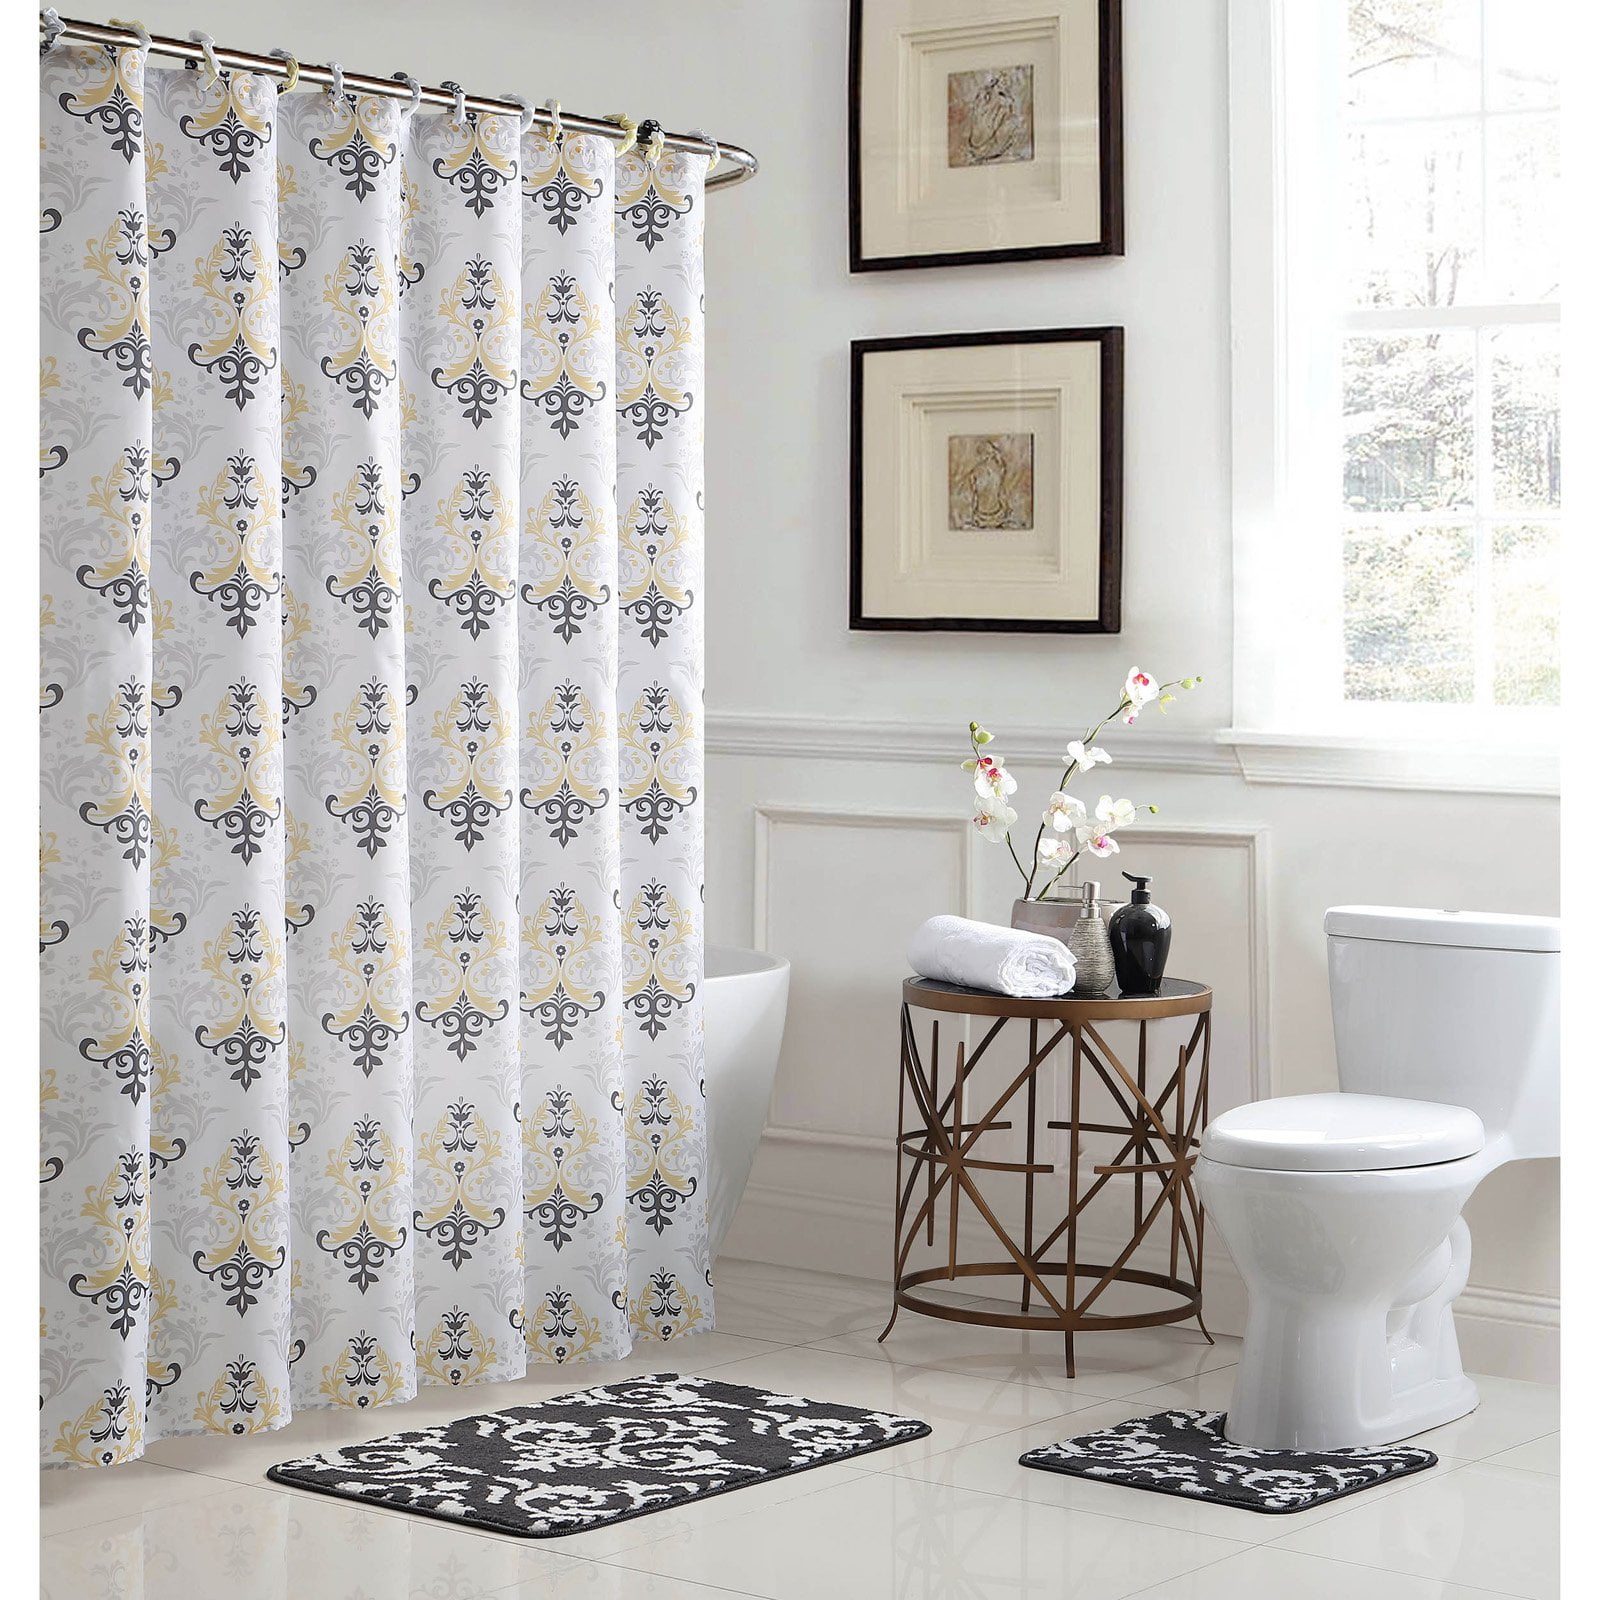 NEW EHF 98715 15pc shower curtain set with Bath Mat  *FREE SHIPPING* 